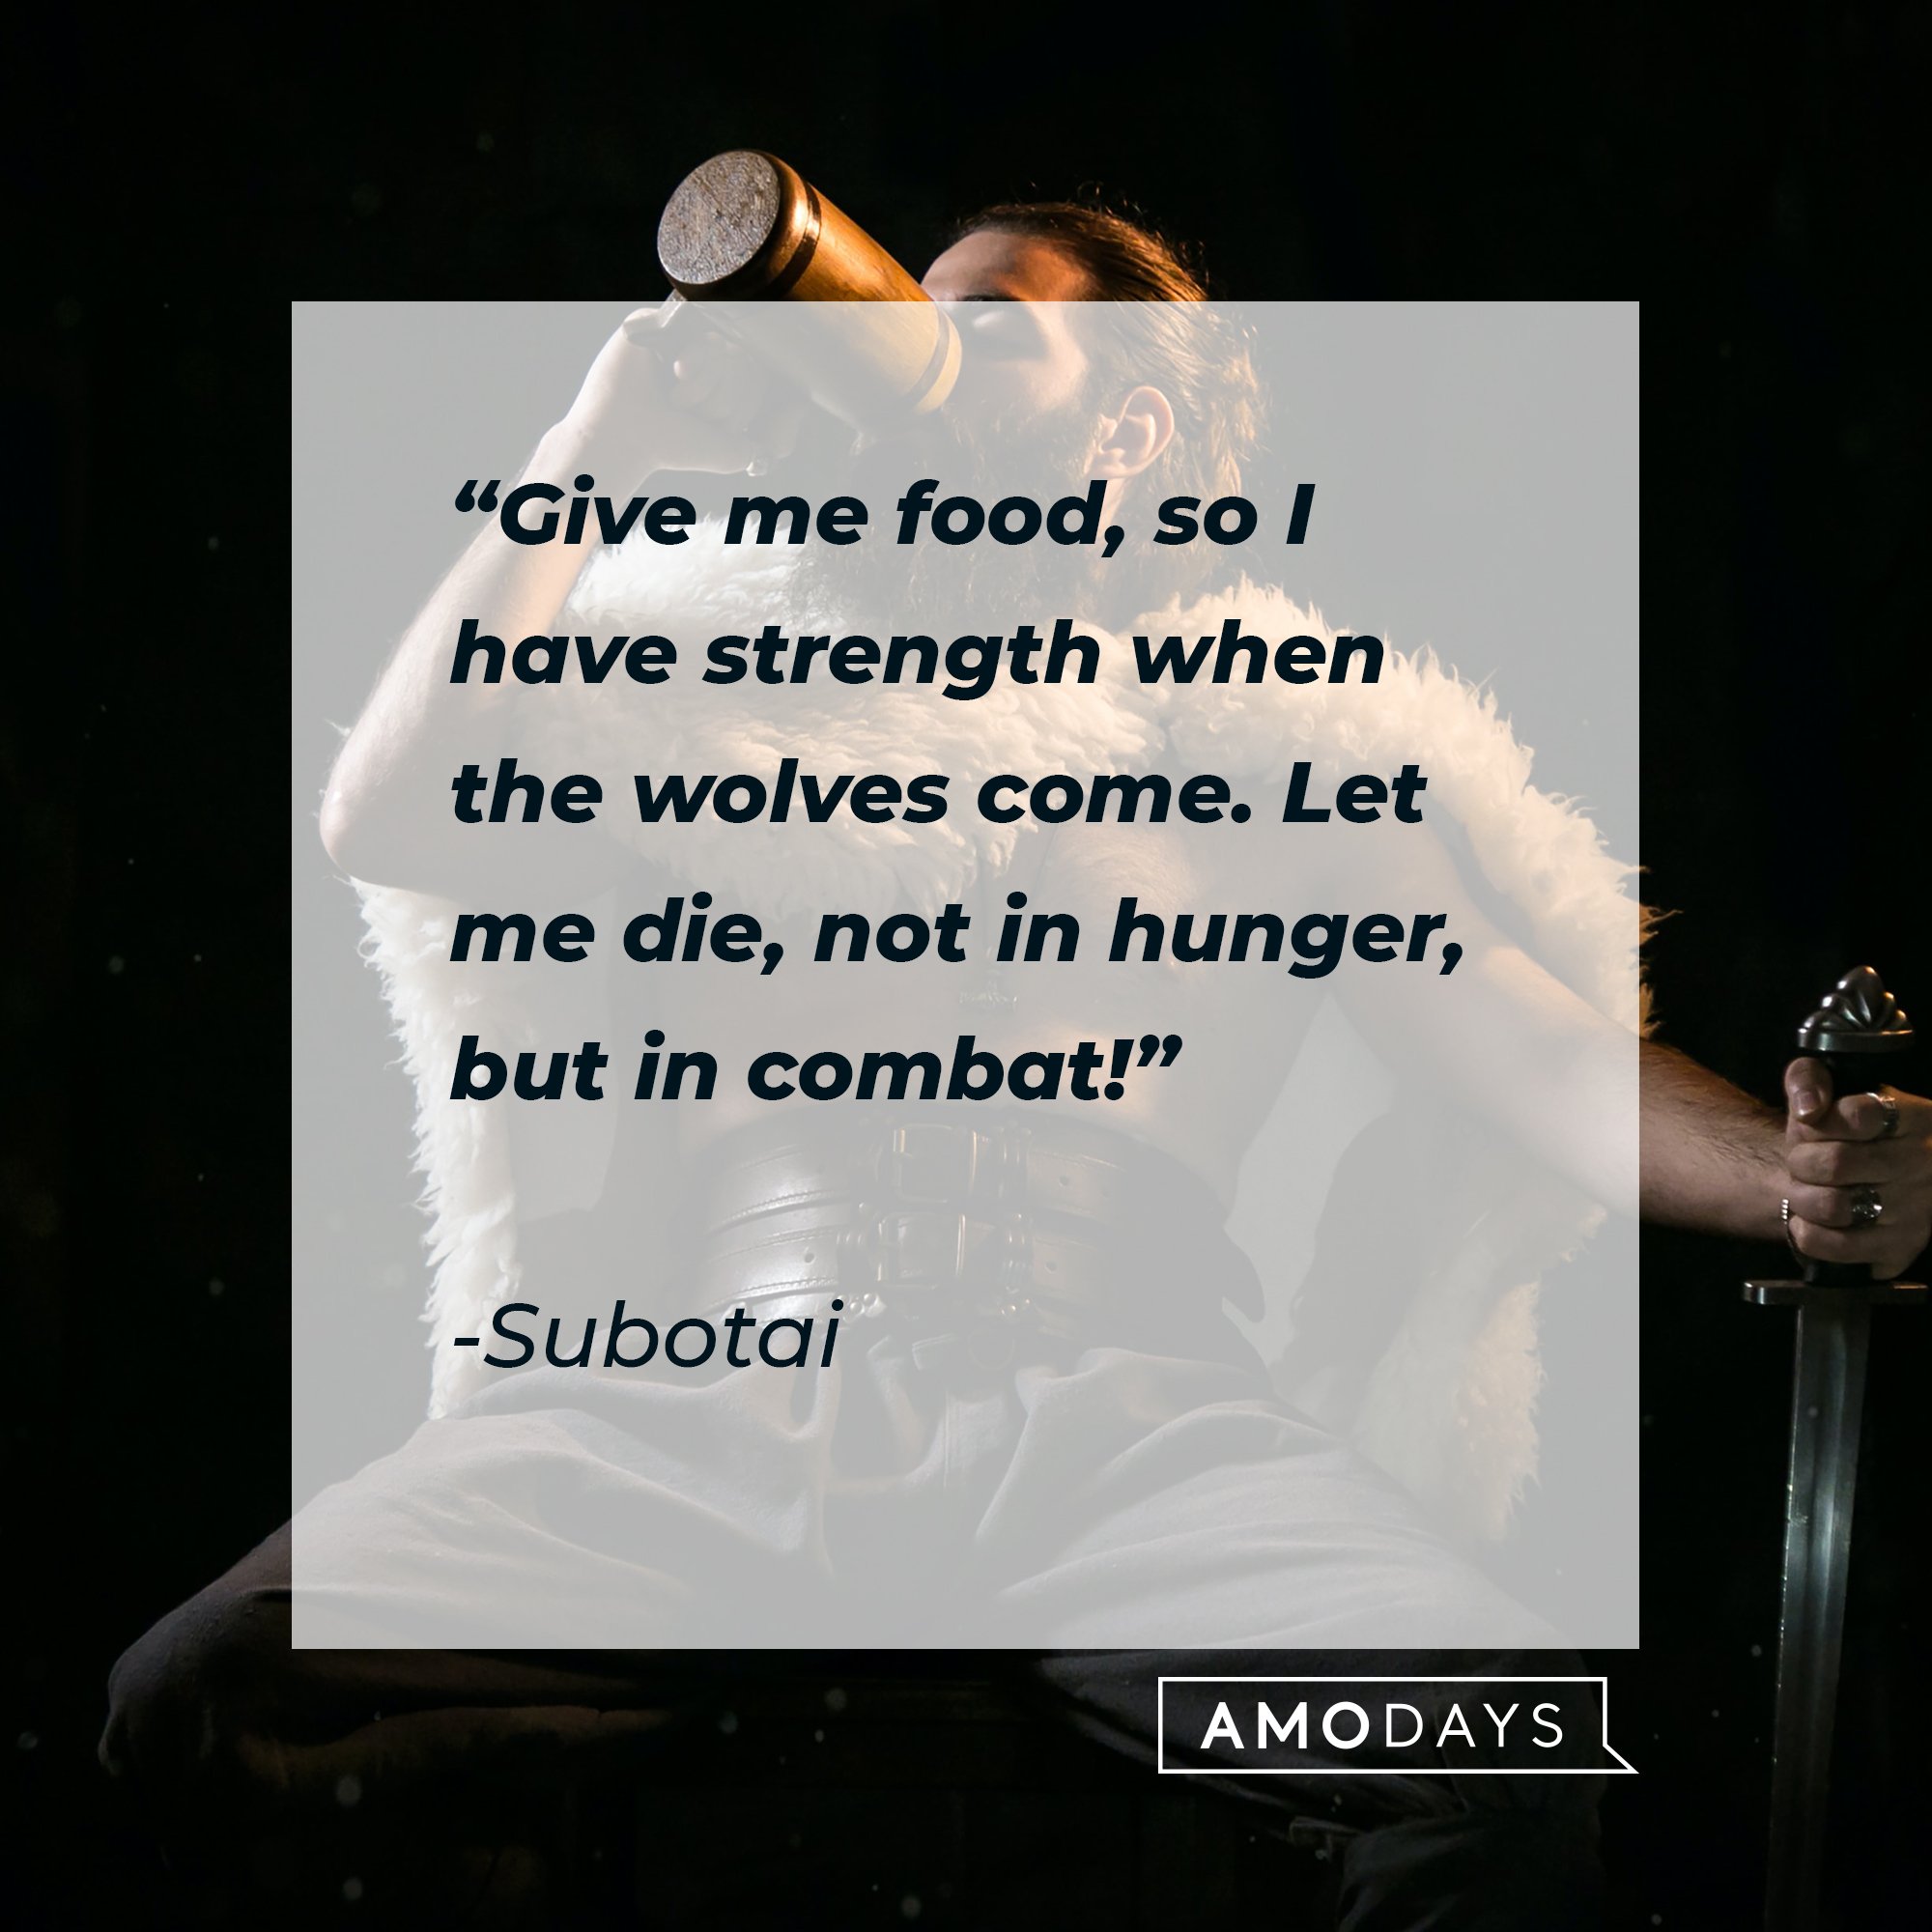 Subotai's quote: “Give me food, so I have strength when the wolves come. Let me die, not in hunger, but in combat!” | Image: AmoDays